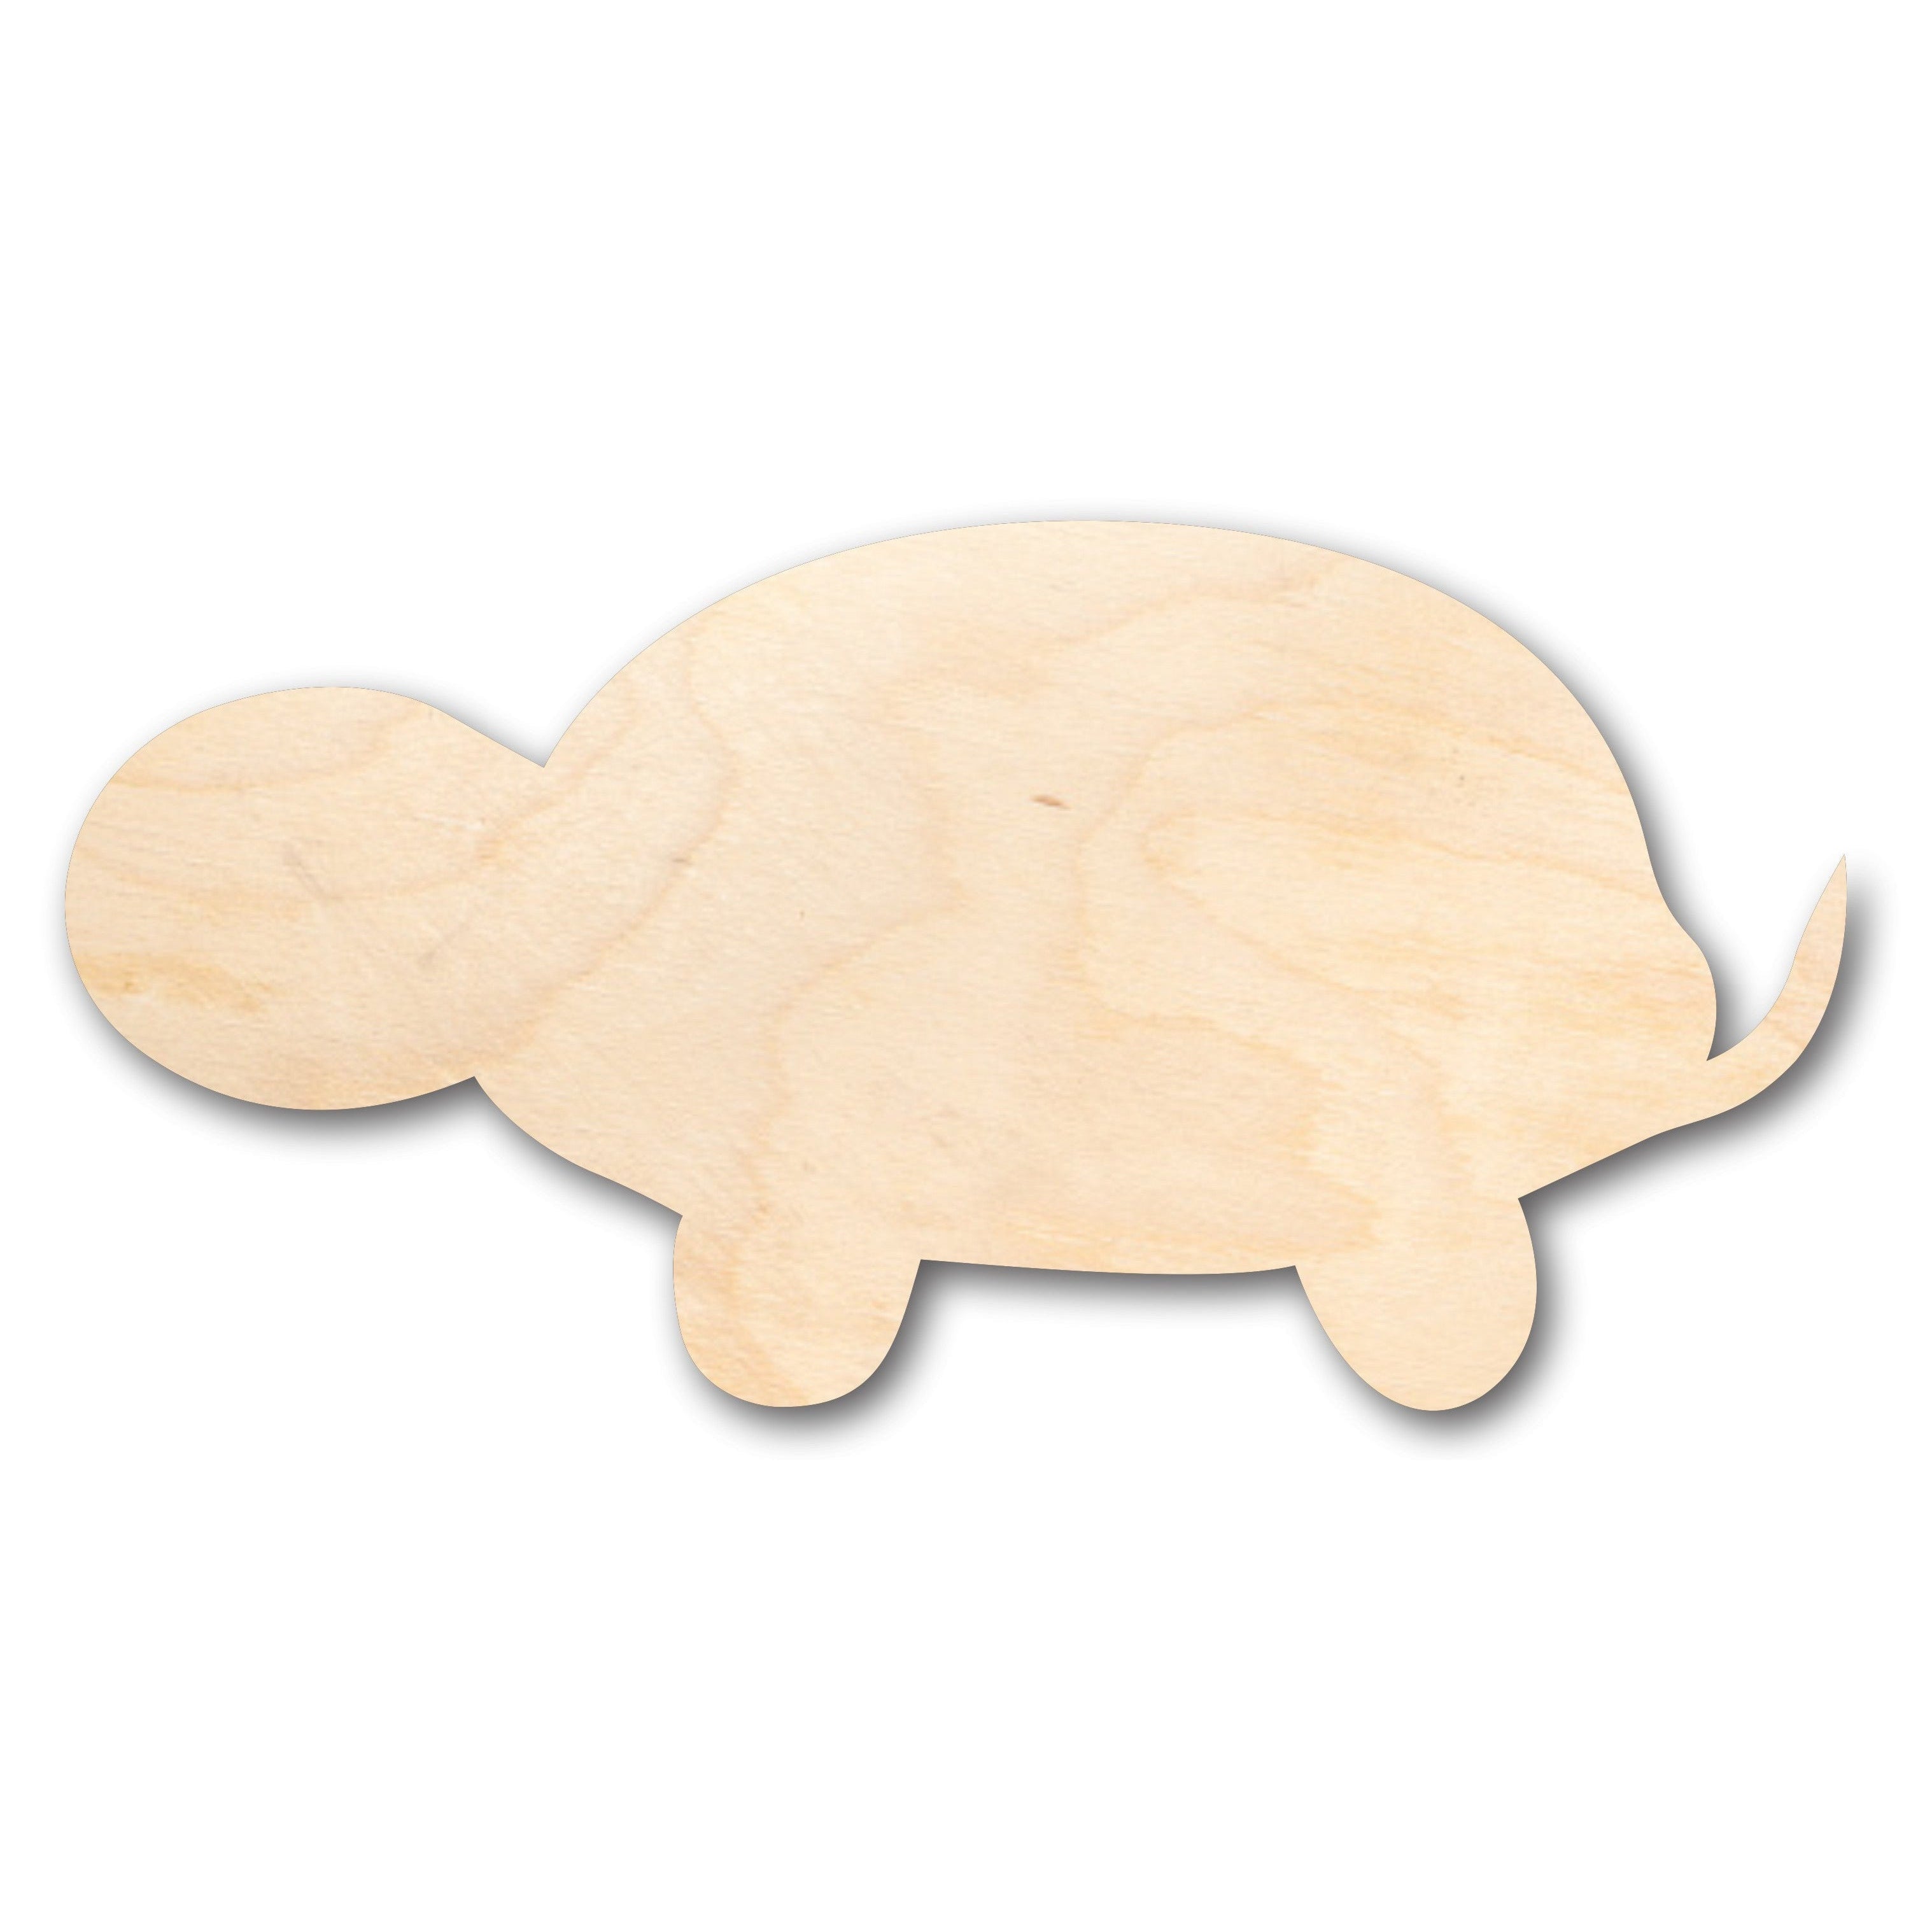 Unfinished Wood Cute Turtle Shape - Craft - up to 36